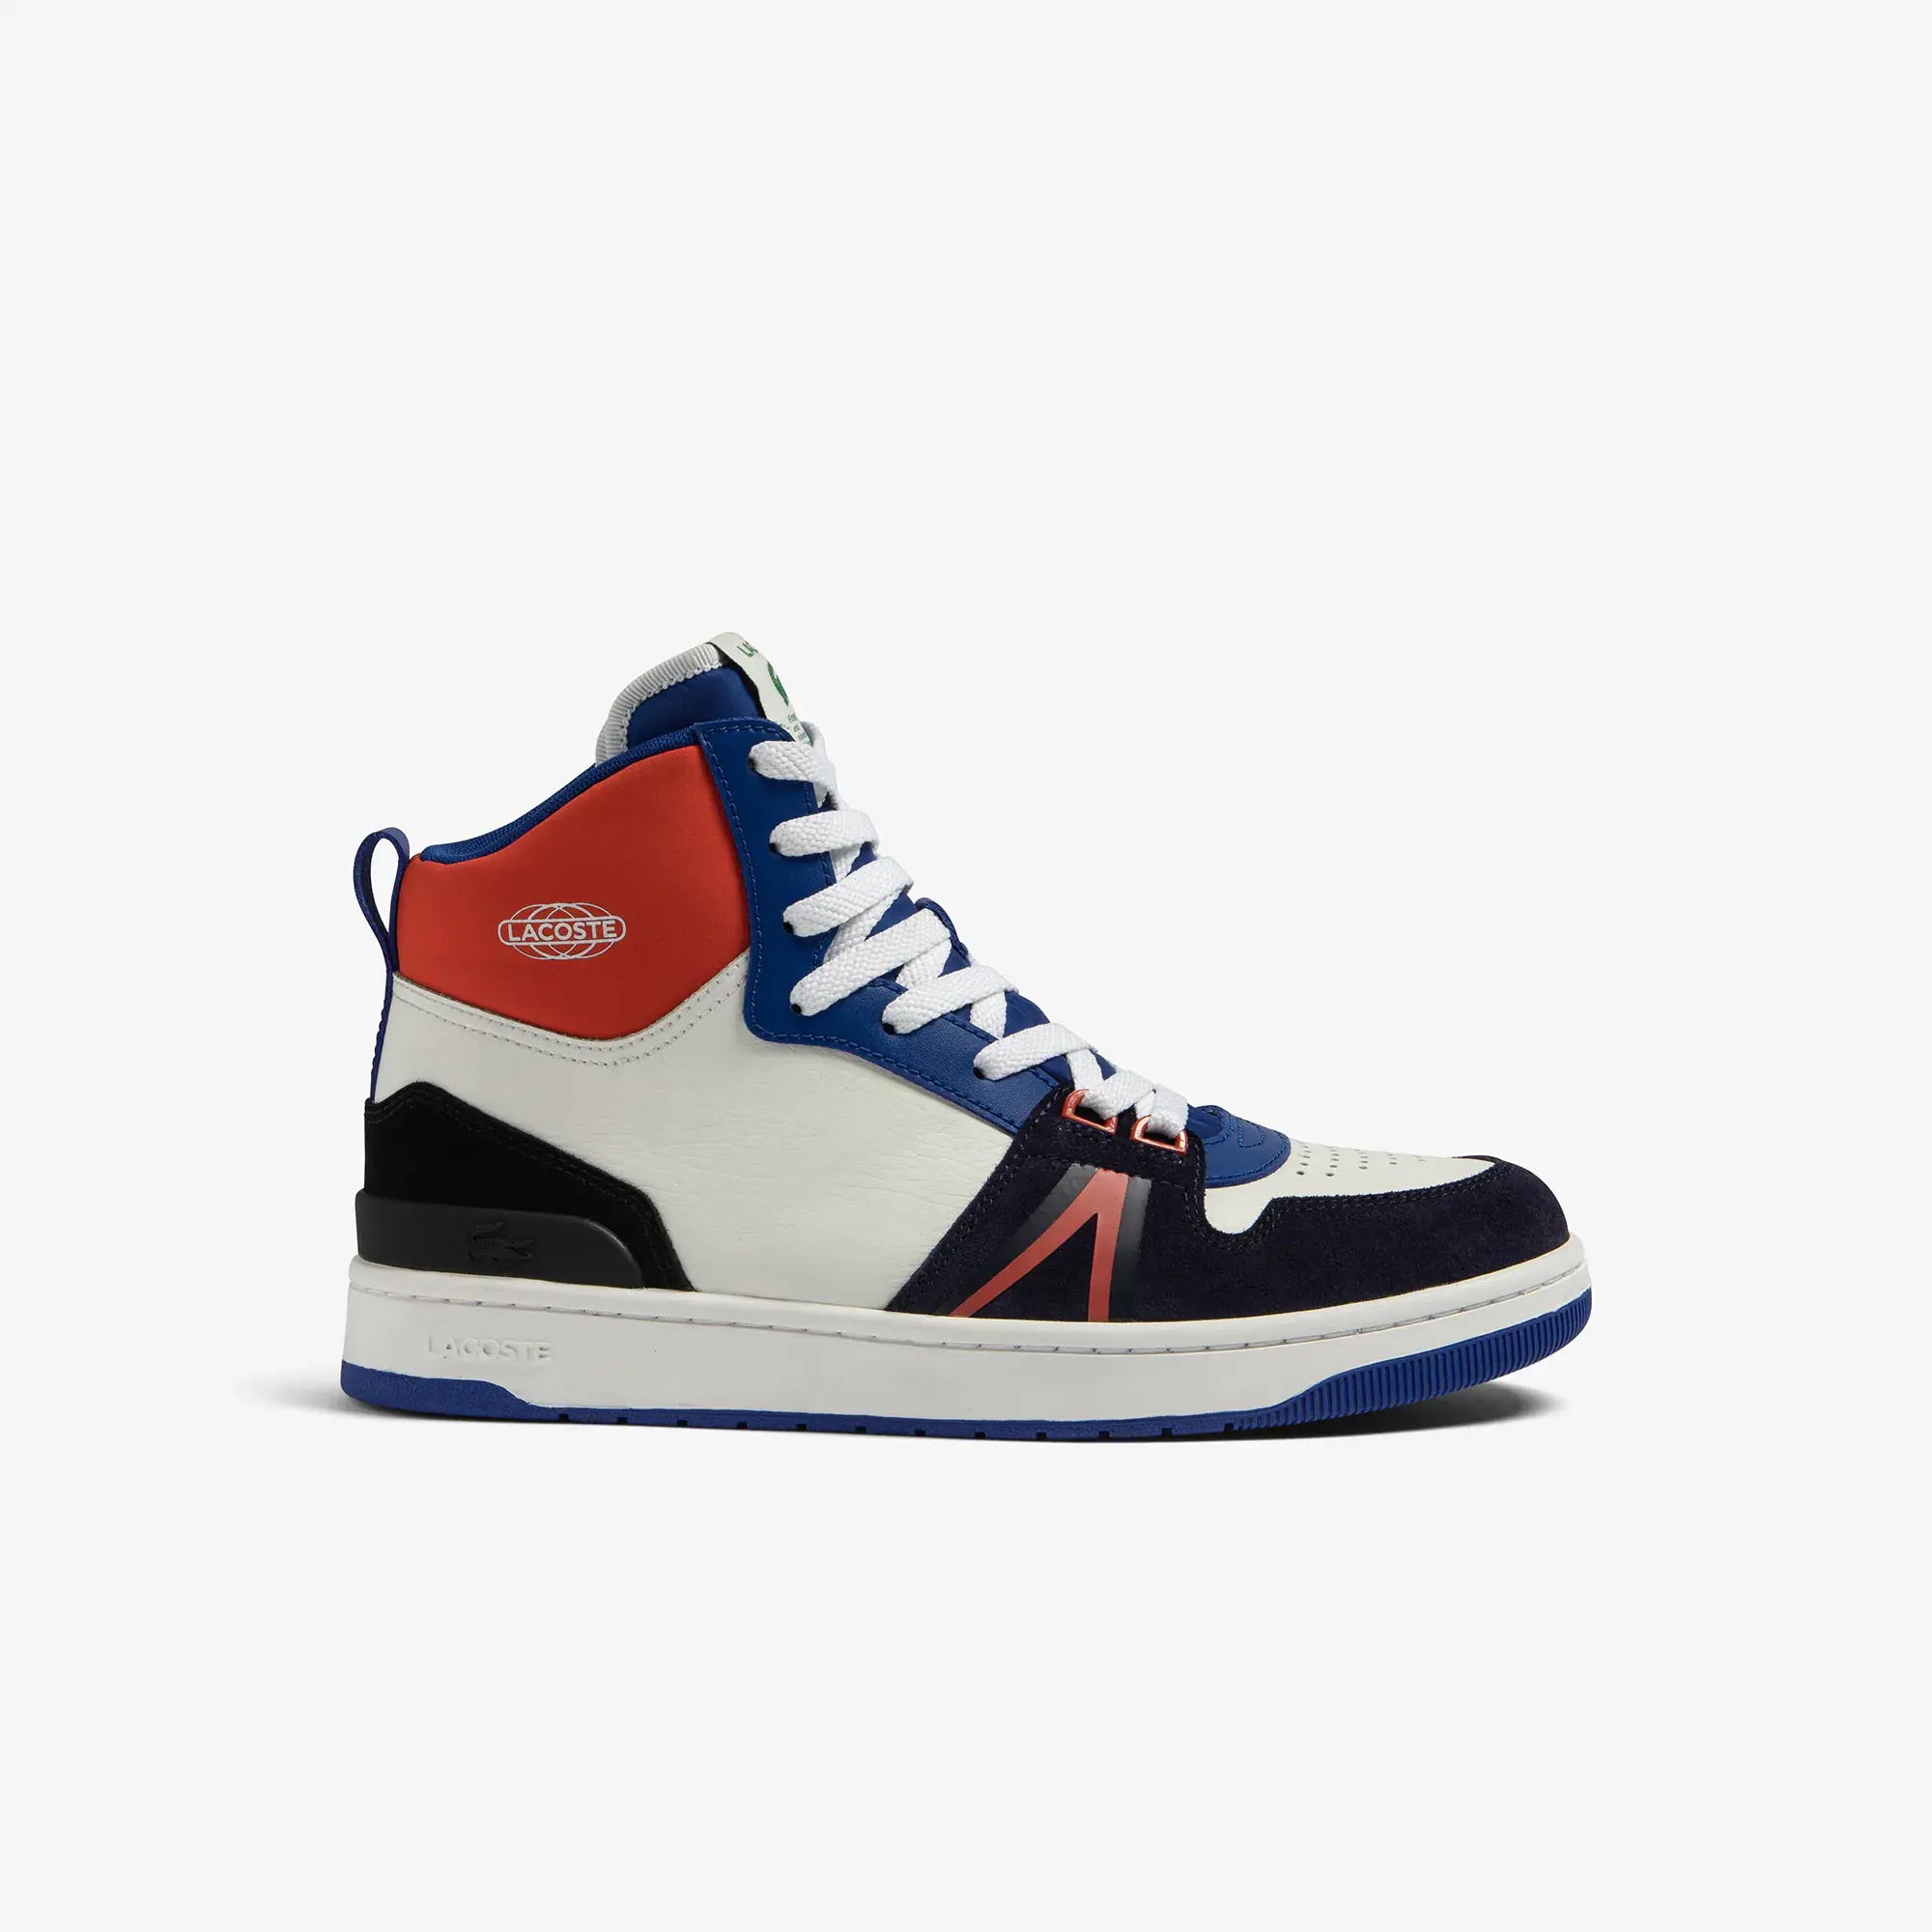 Lacoste Men's L001 Leather Colorblock High-Top Sneakers. 1